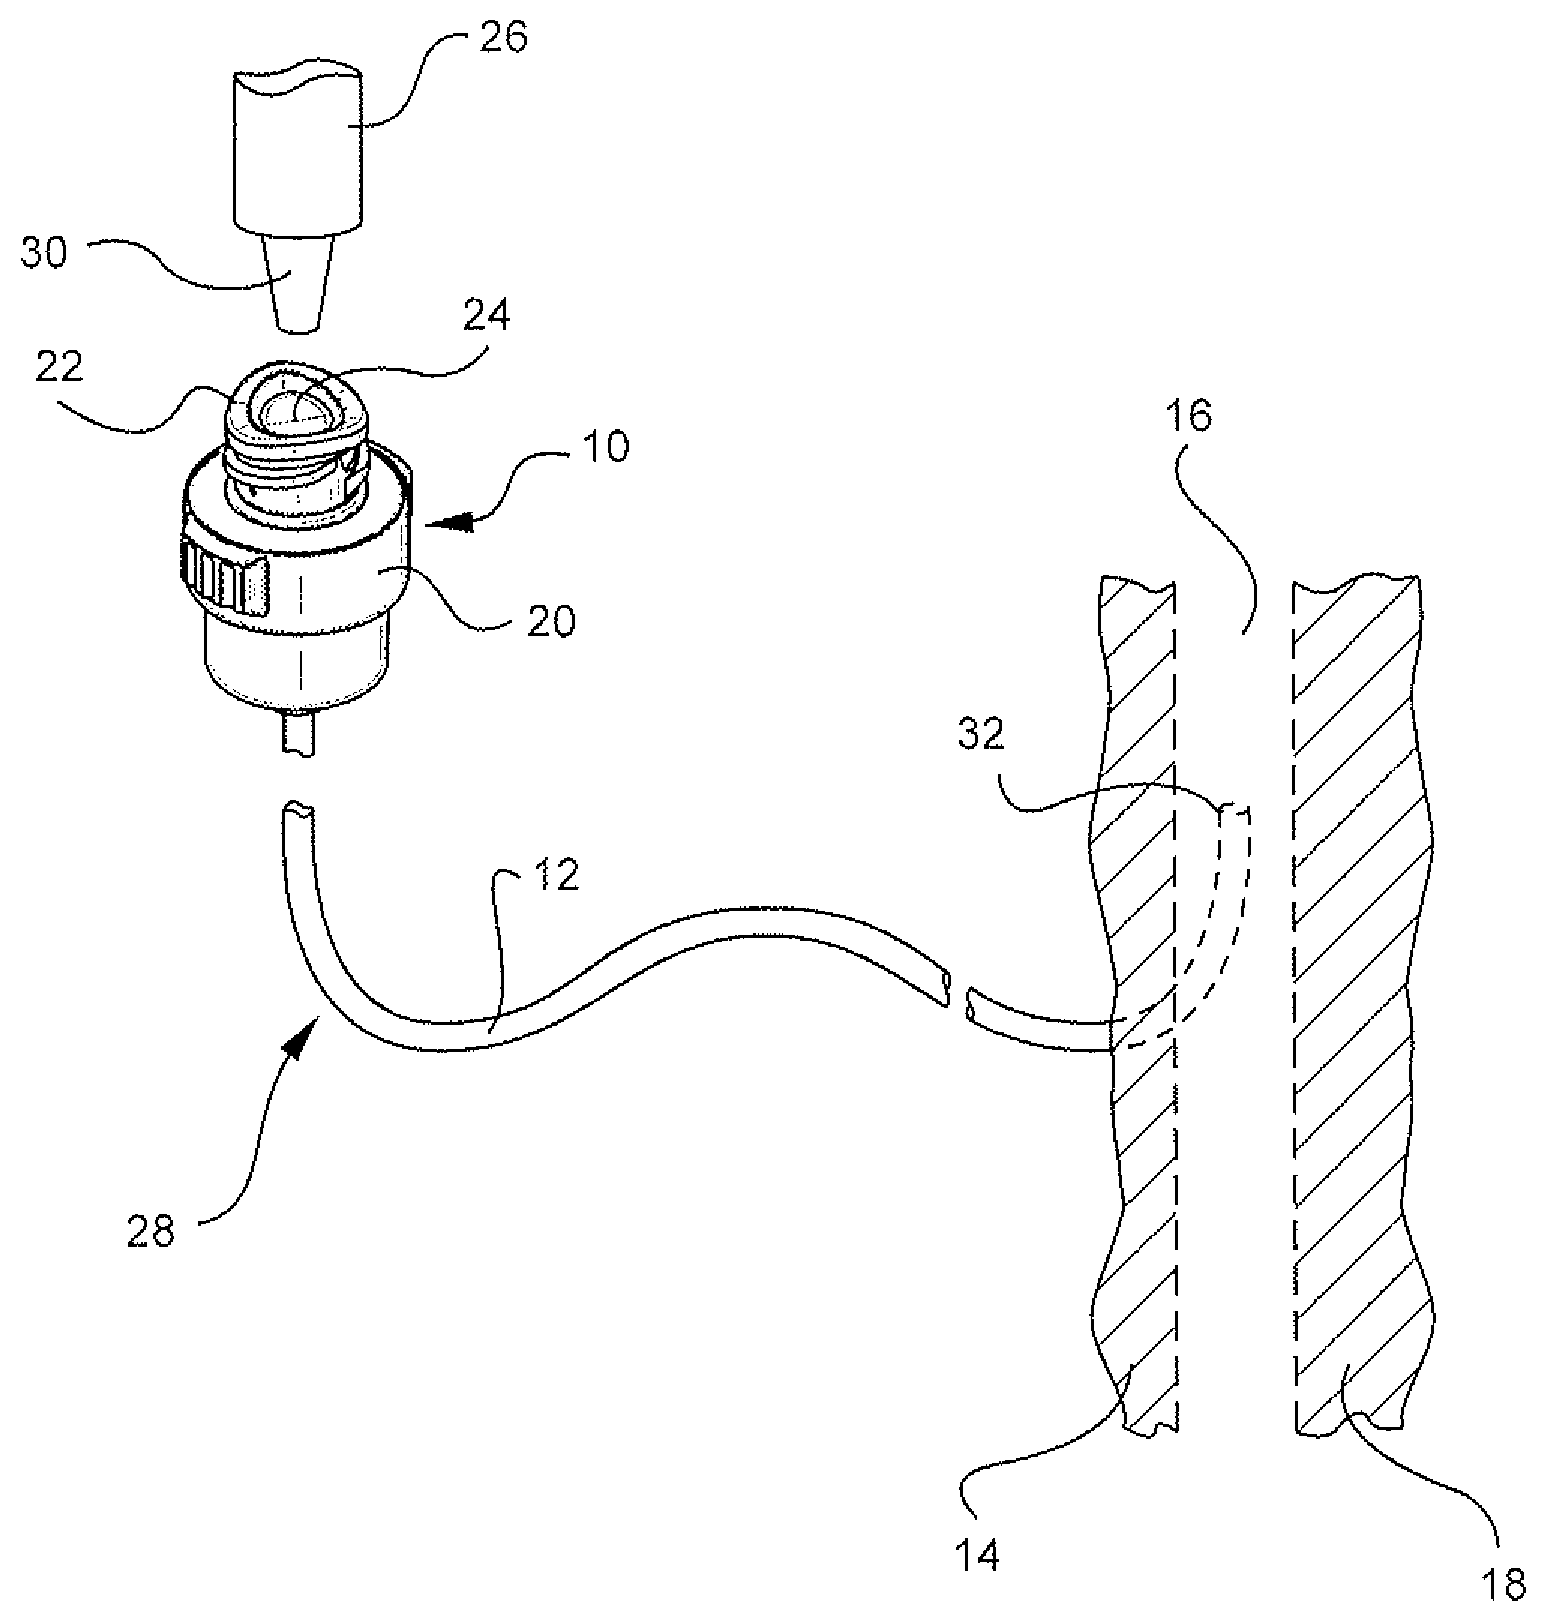 Antimicrobial vascular access device